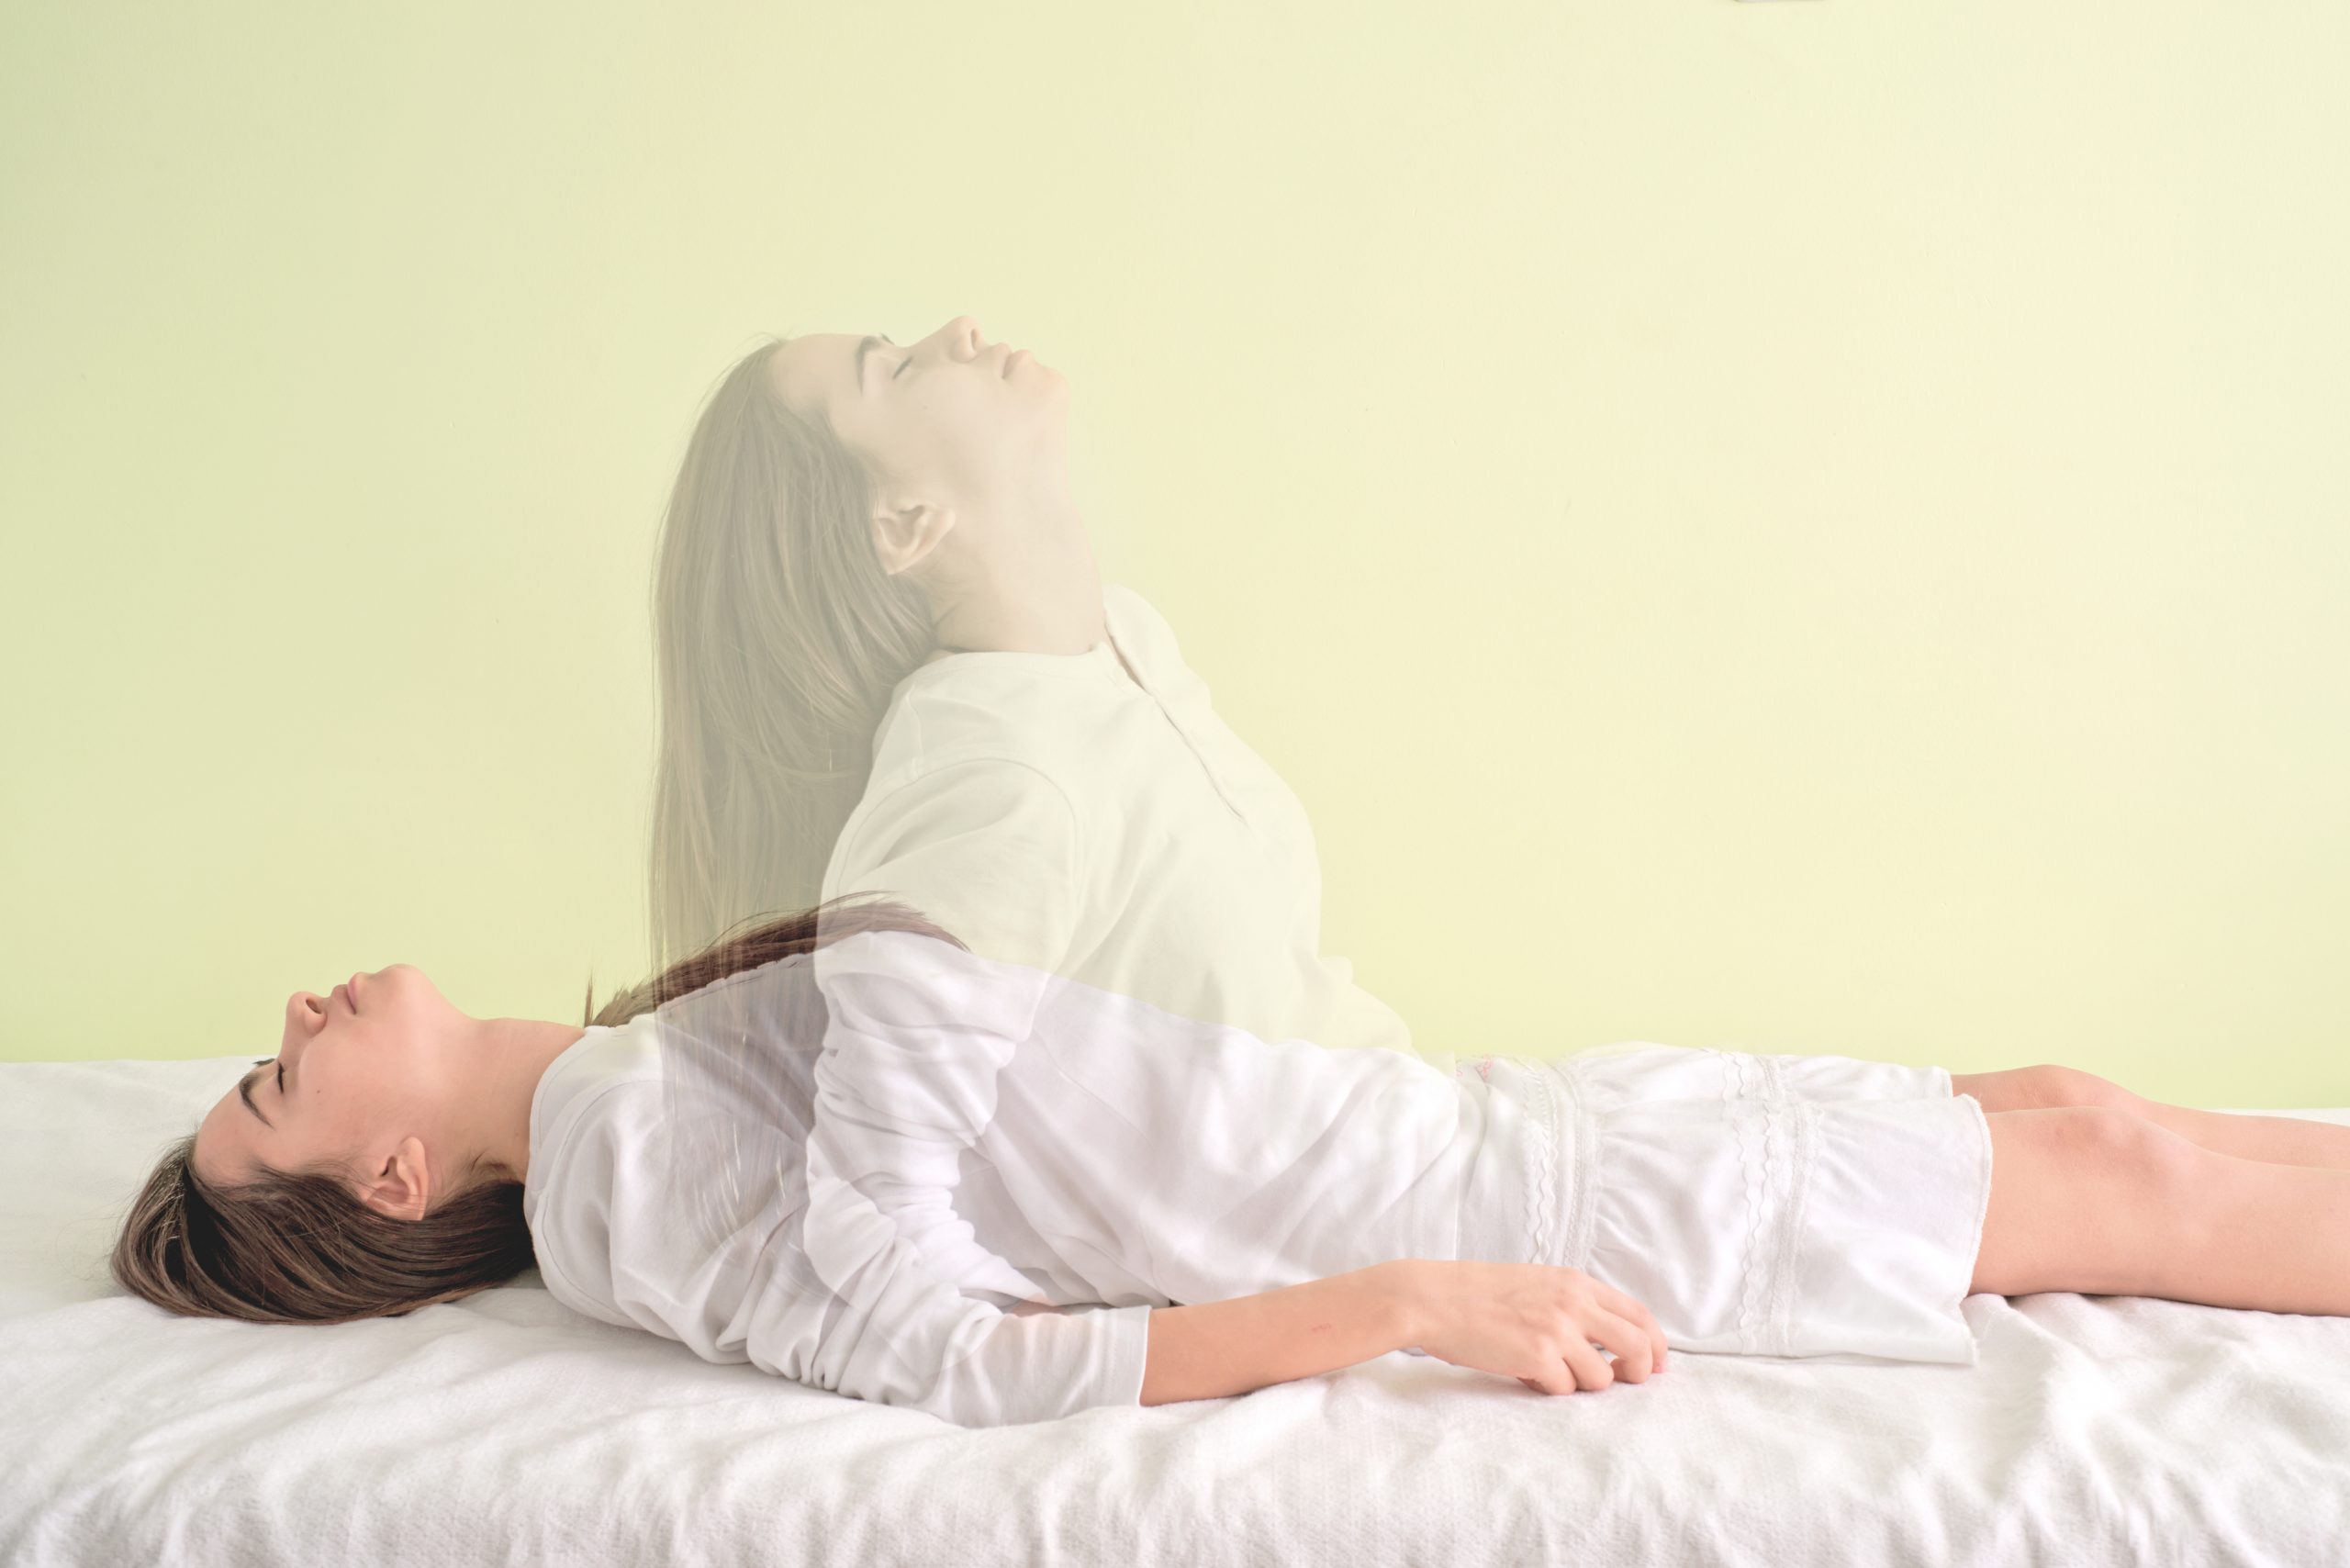 A woman lies on her back on a white surface against a light green background. Another translucent image of her spirit rises above, giving an impression of her soul leaving her body. She is wearing a white outfit.